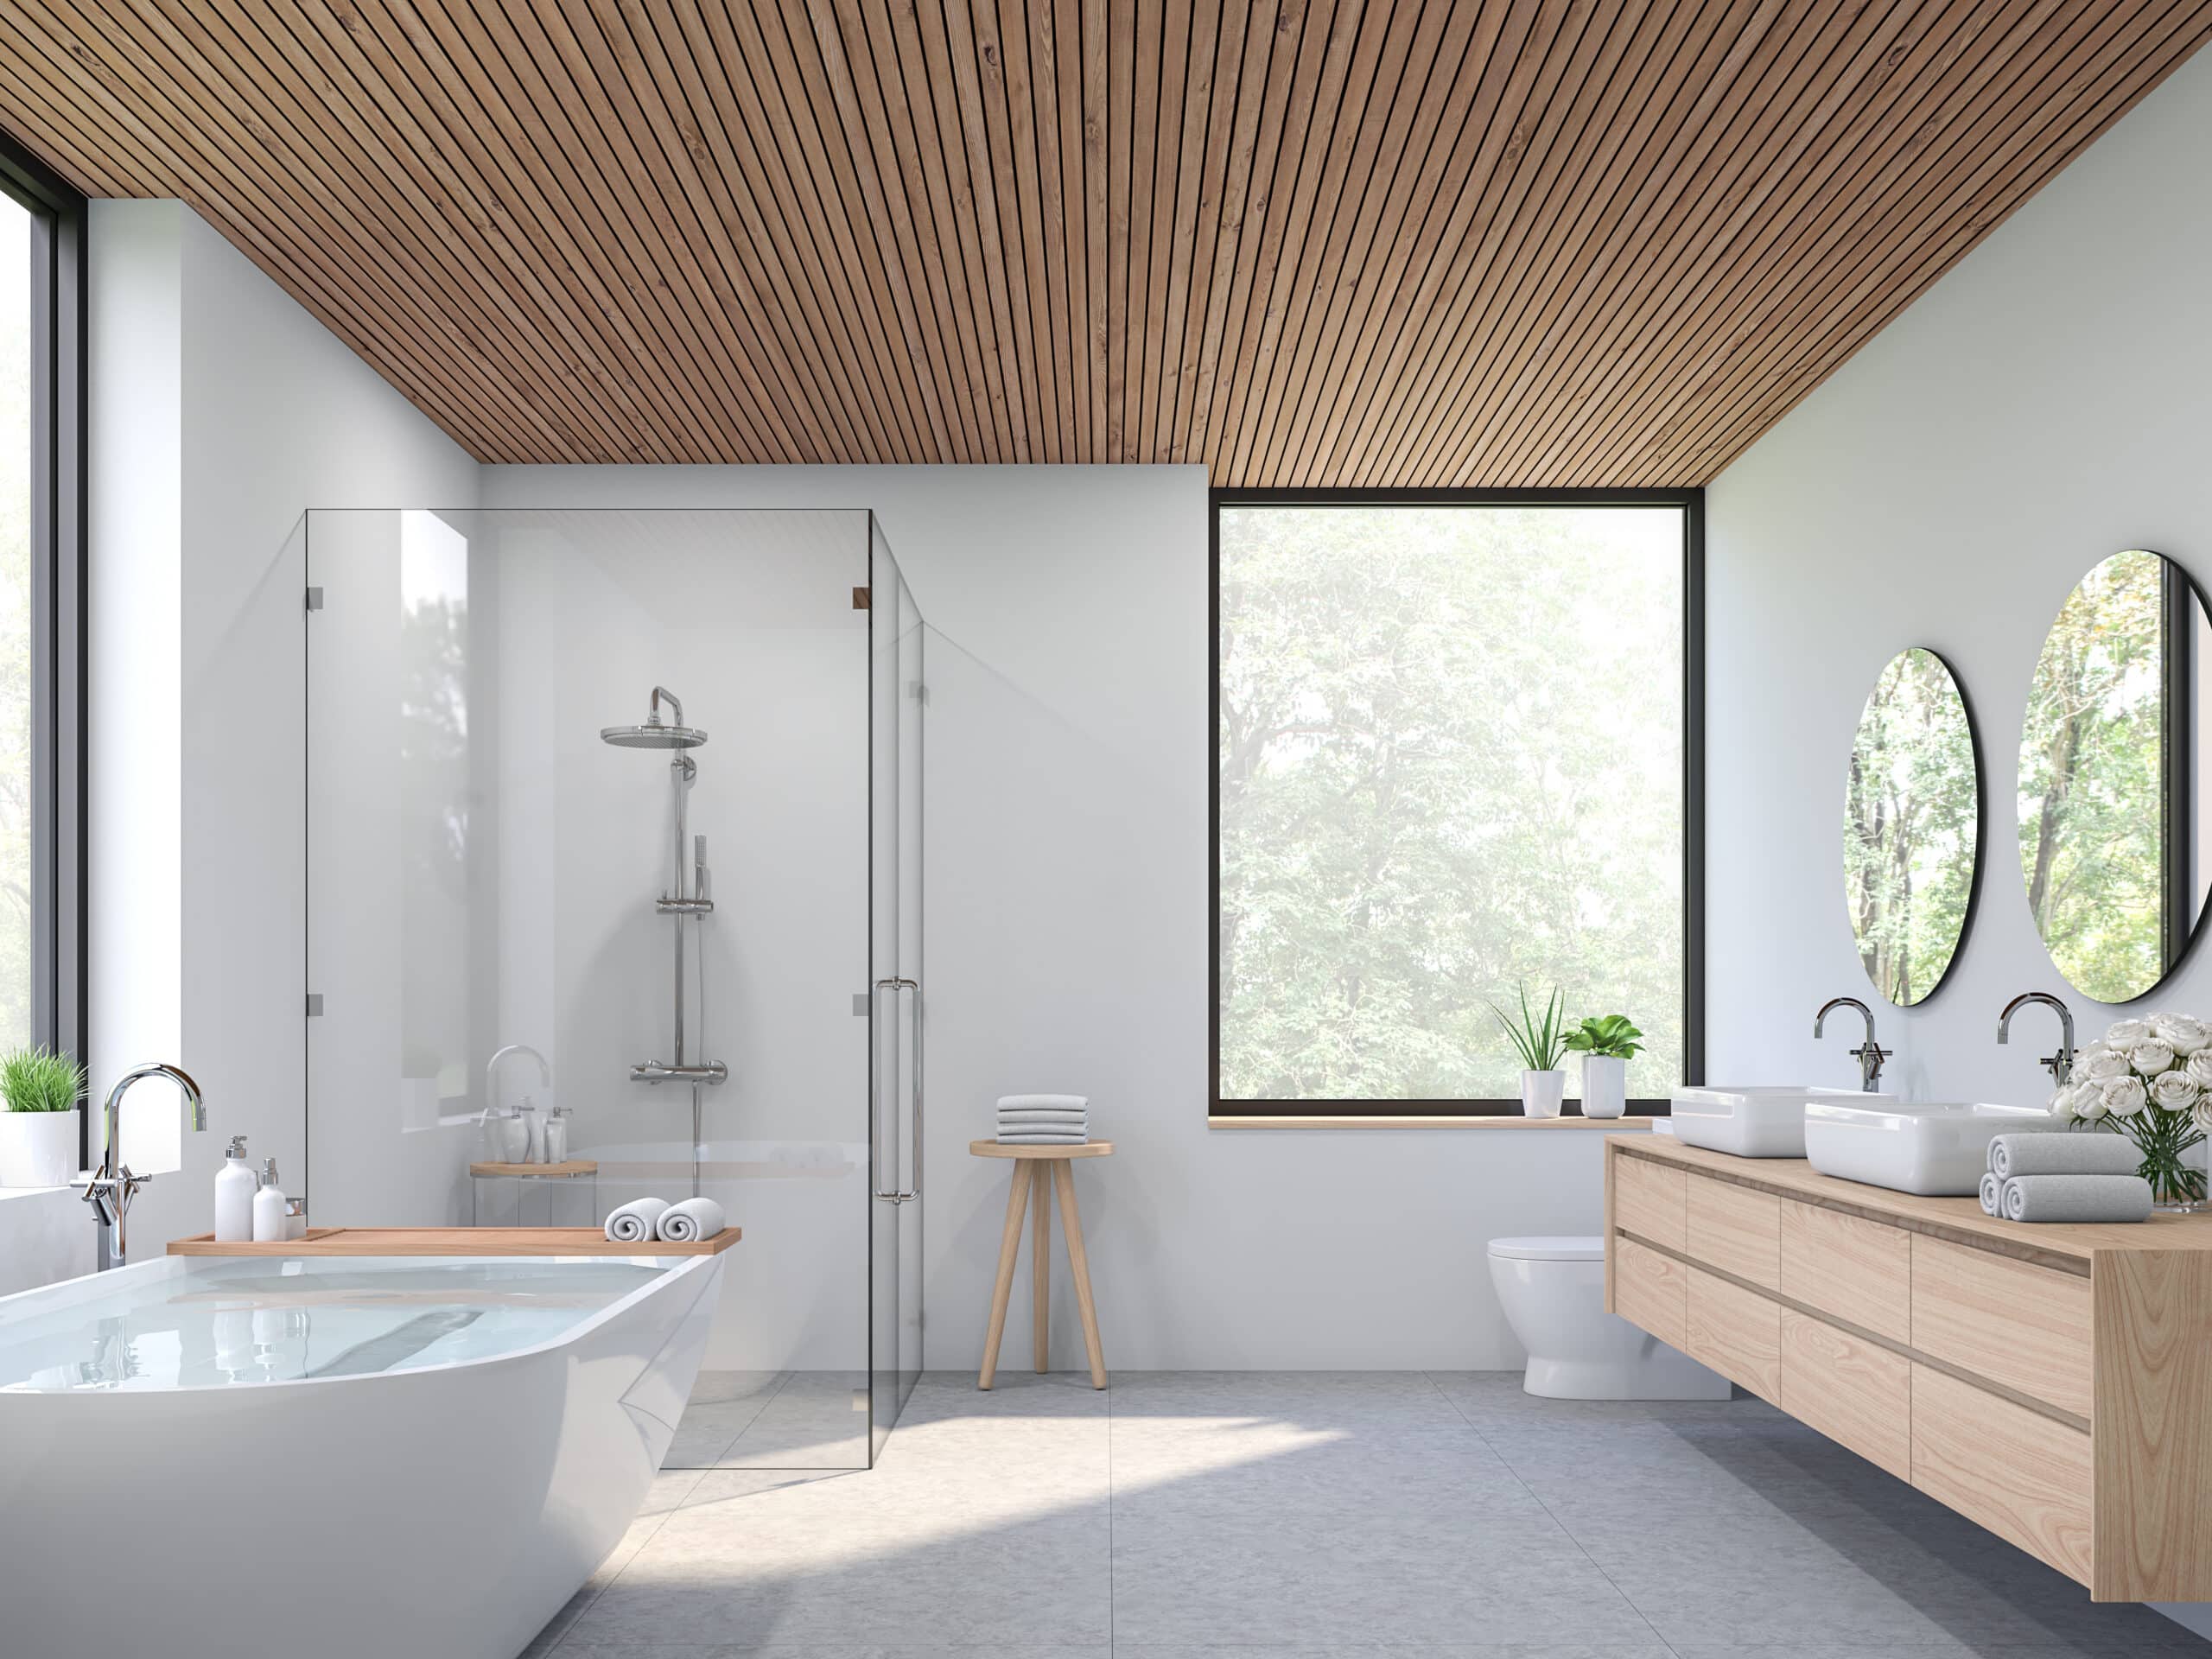 Modern contemporary loft bathroom 3d render.there are concrete tile floor, white wall and wood plank ceiling ,There are large windows look out to see the nature view.